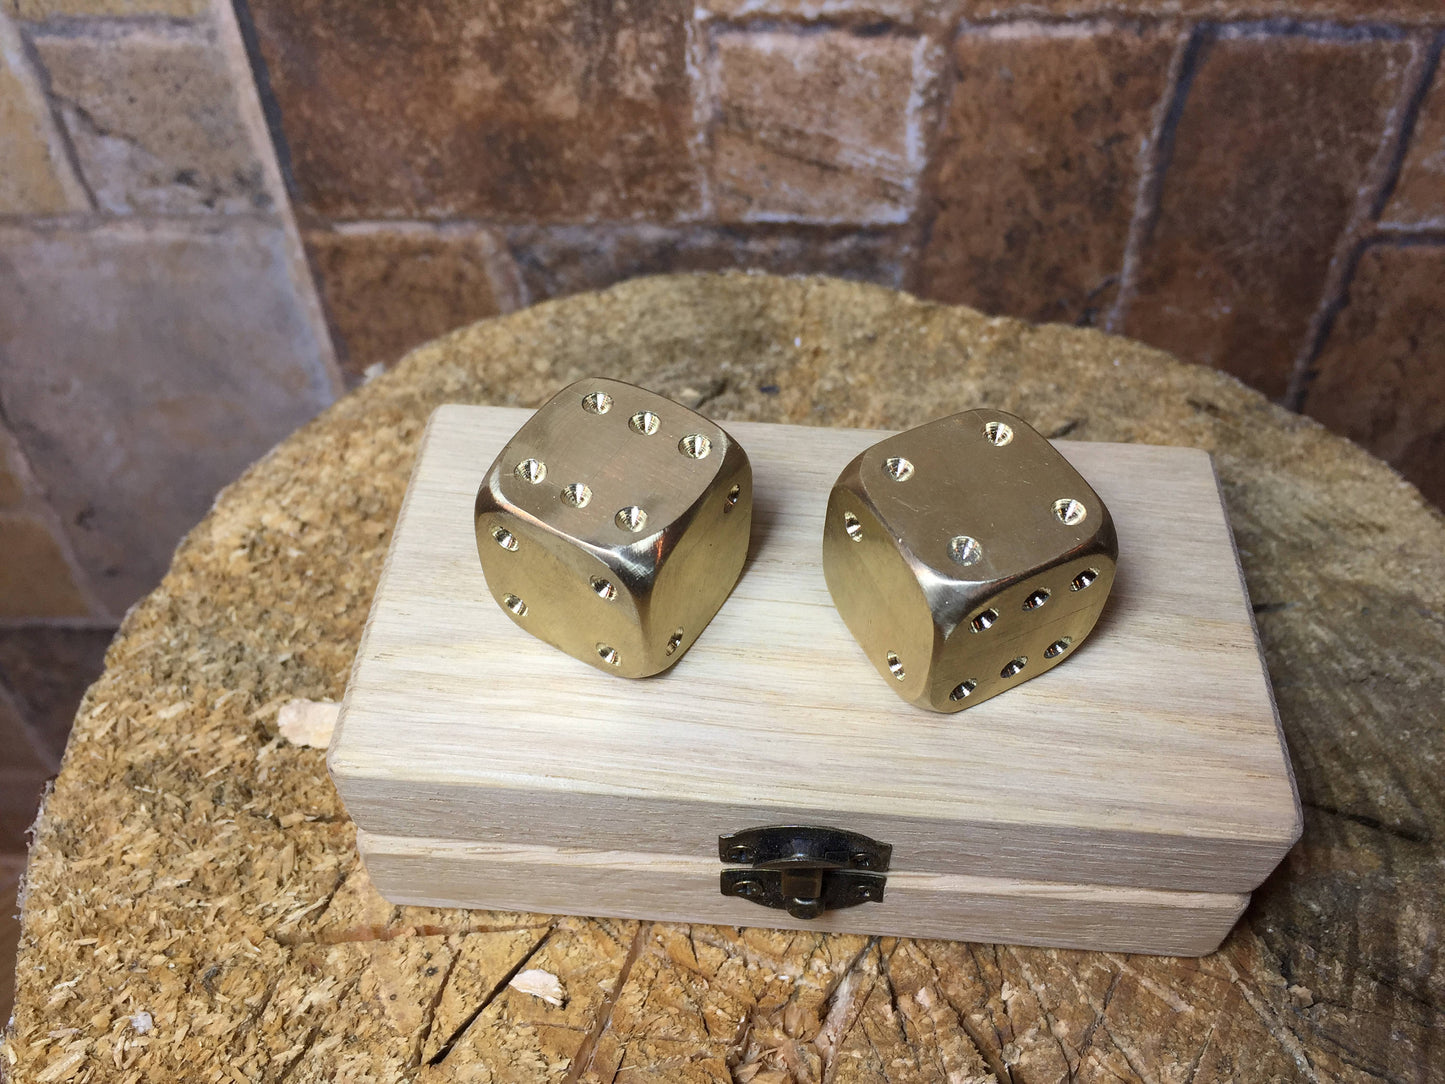 Bronze dices with dice box, engraved dice box, personalized dice box,dice games,wooden box for dices,tabletop gaming,board games,bronze gift